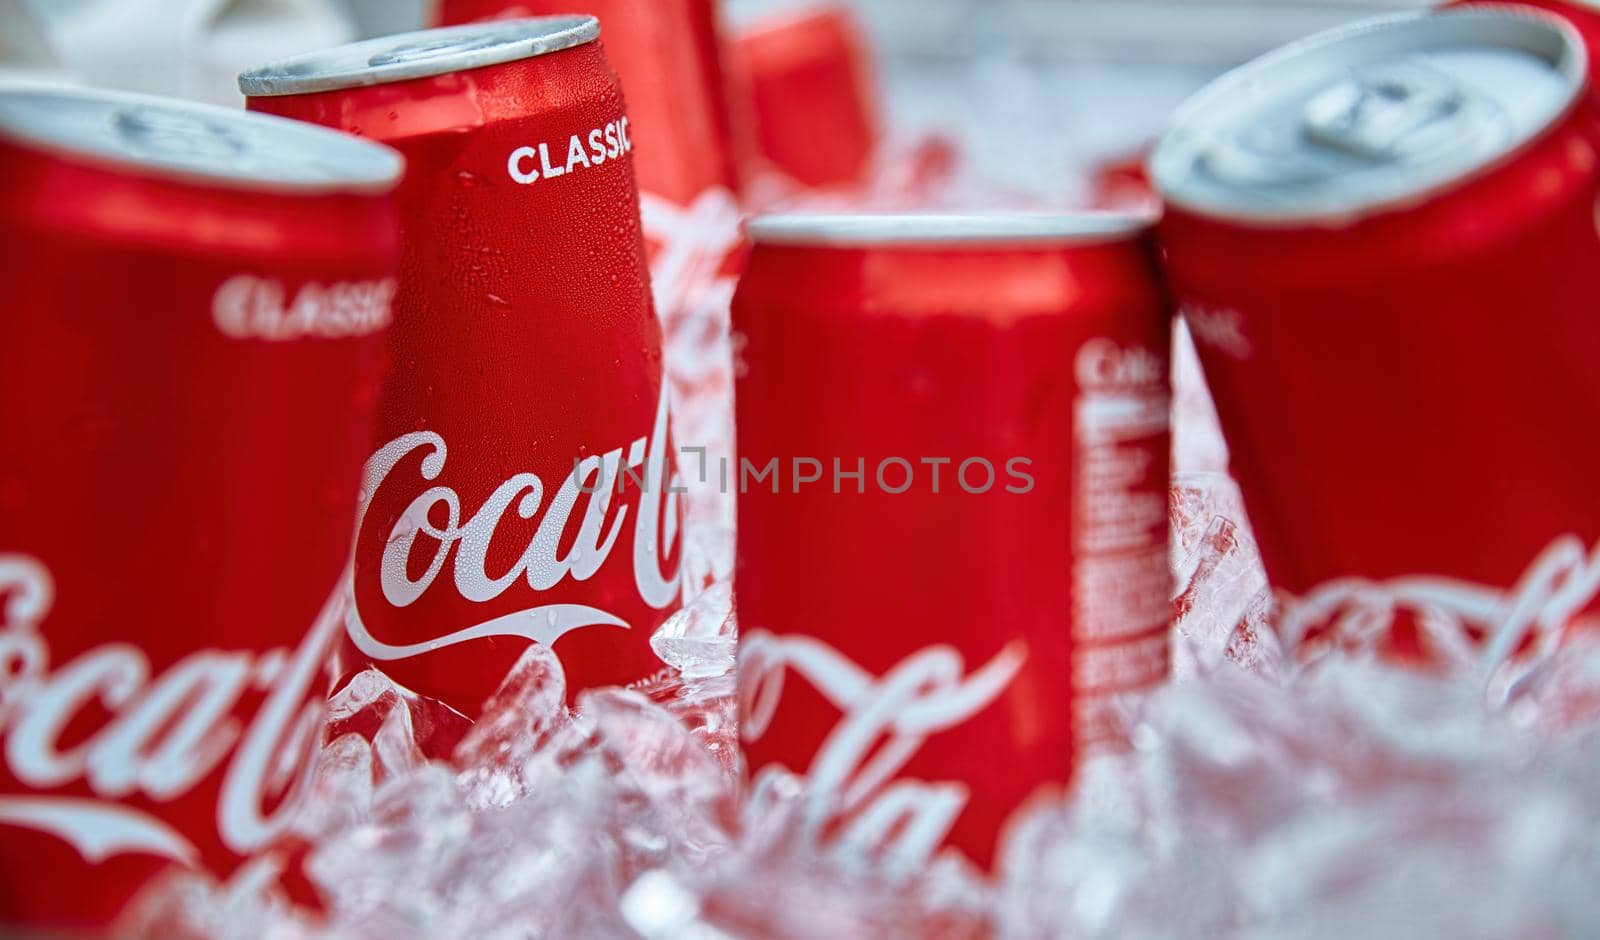 Coca-Cola cans in ice. Popular soft drink. 18.01.2019 Singapore